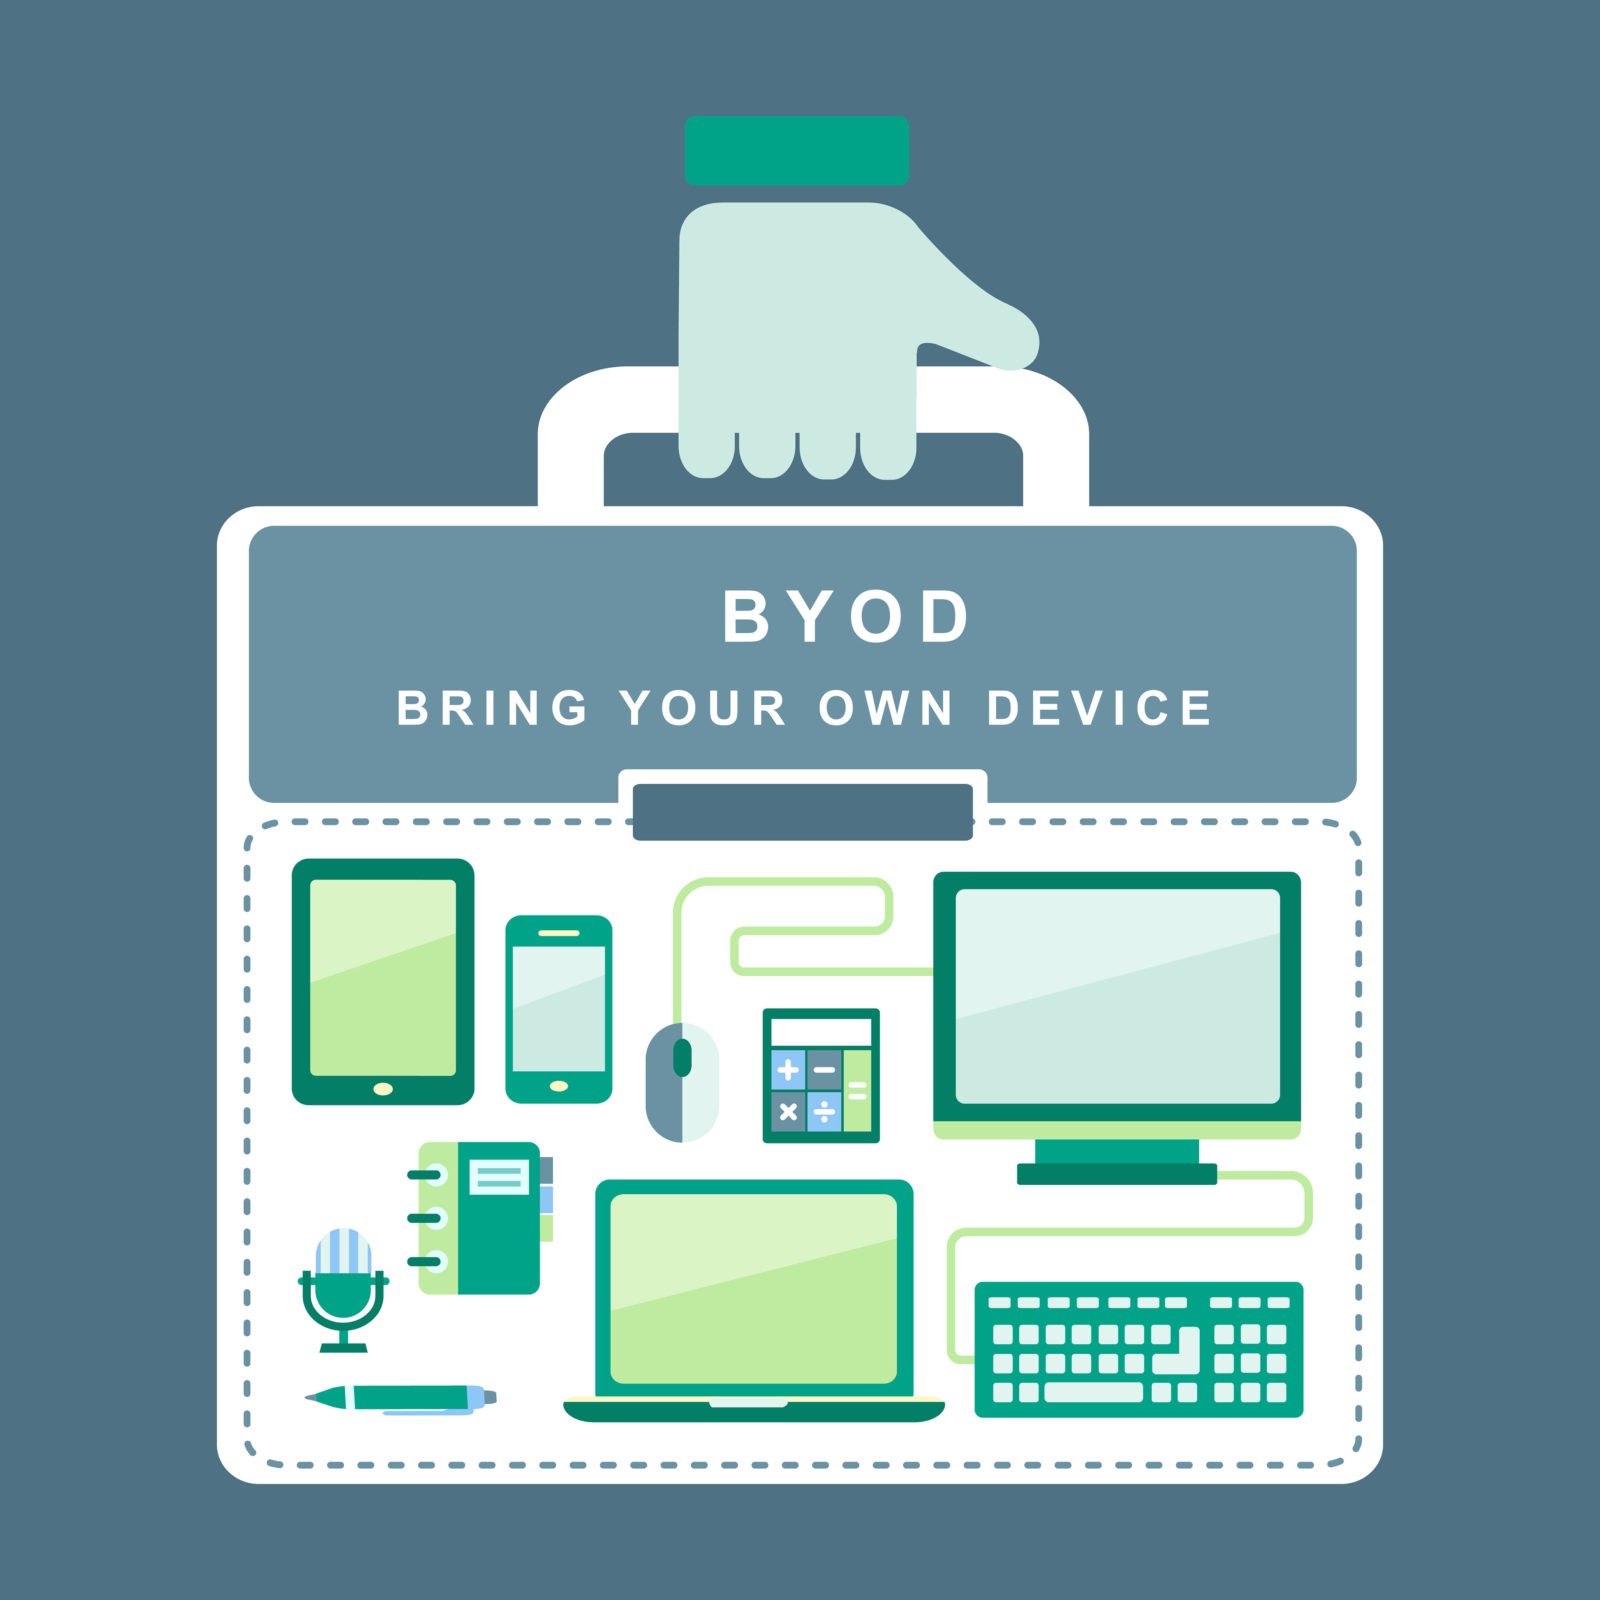 a-guide-to-the-creation-of-a-byod-policy-template-pag